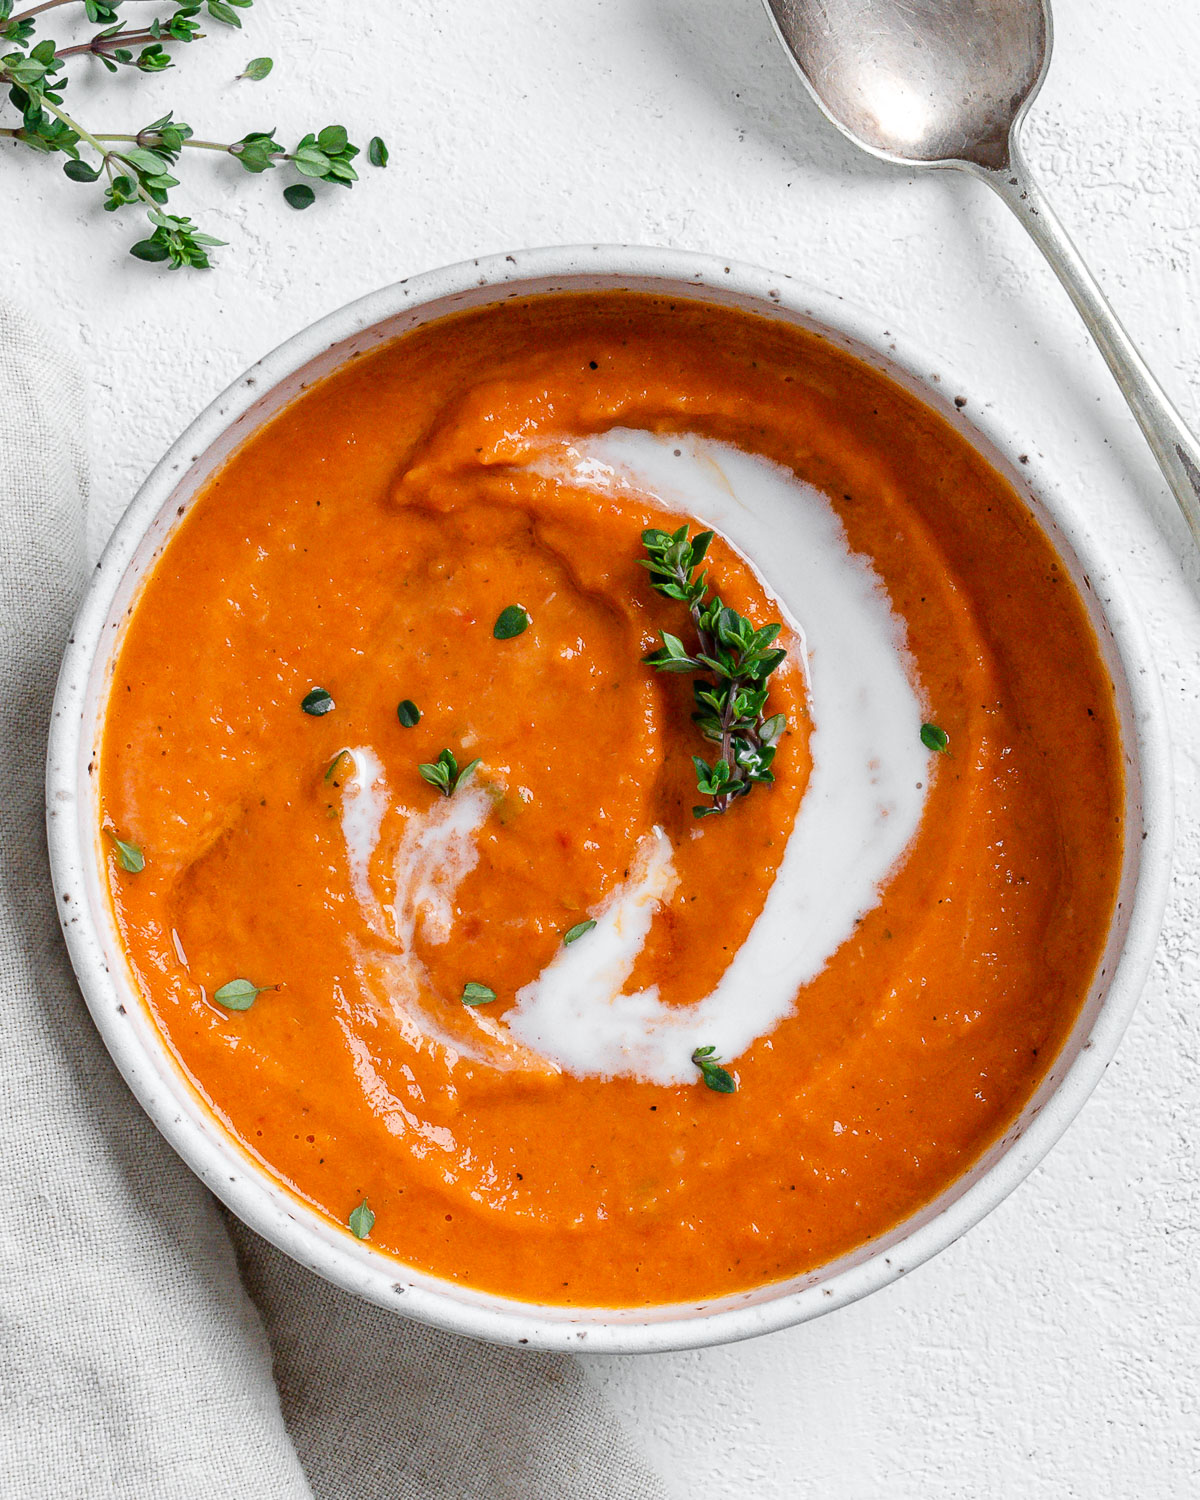 completed Vegan Tomato Bisque with Thyme in a white bowl against a light background